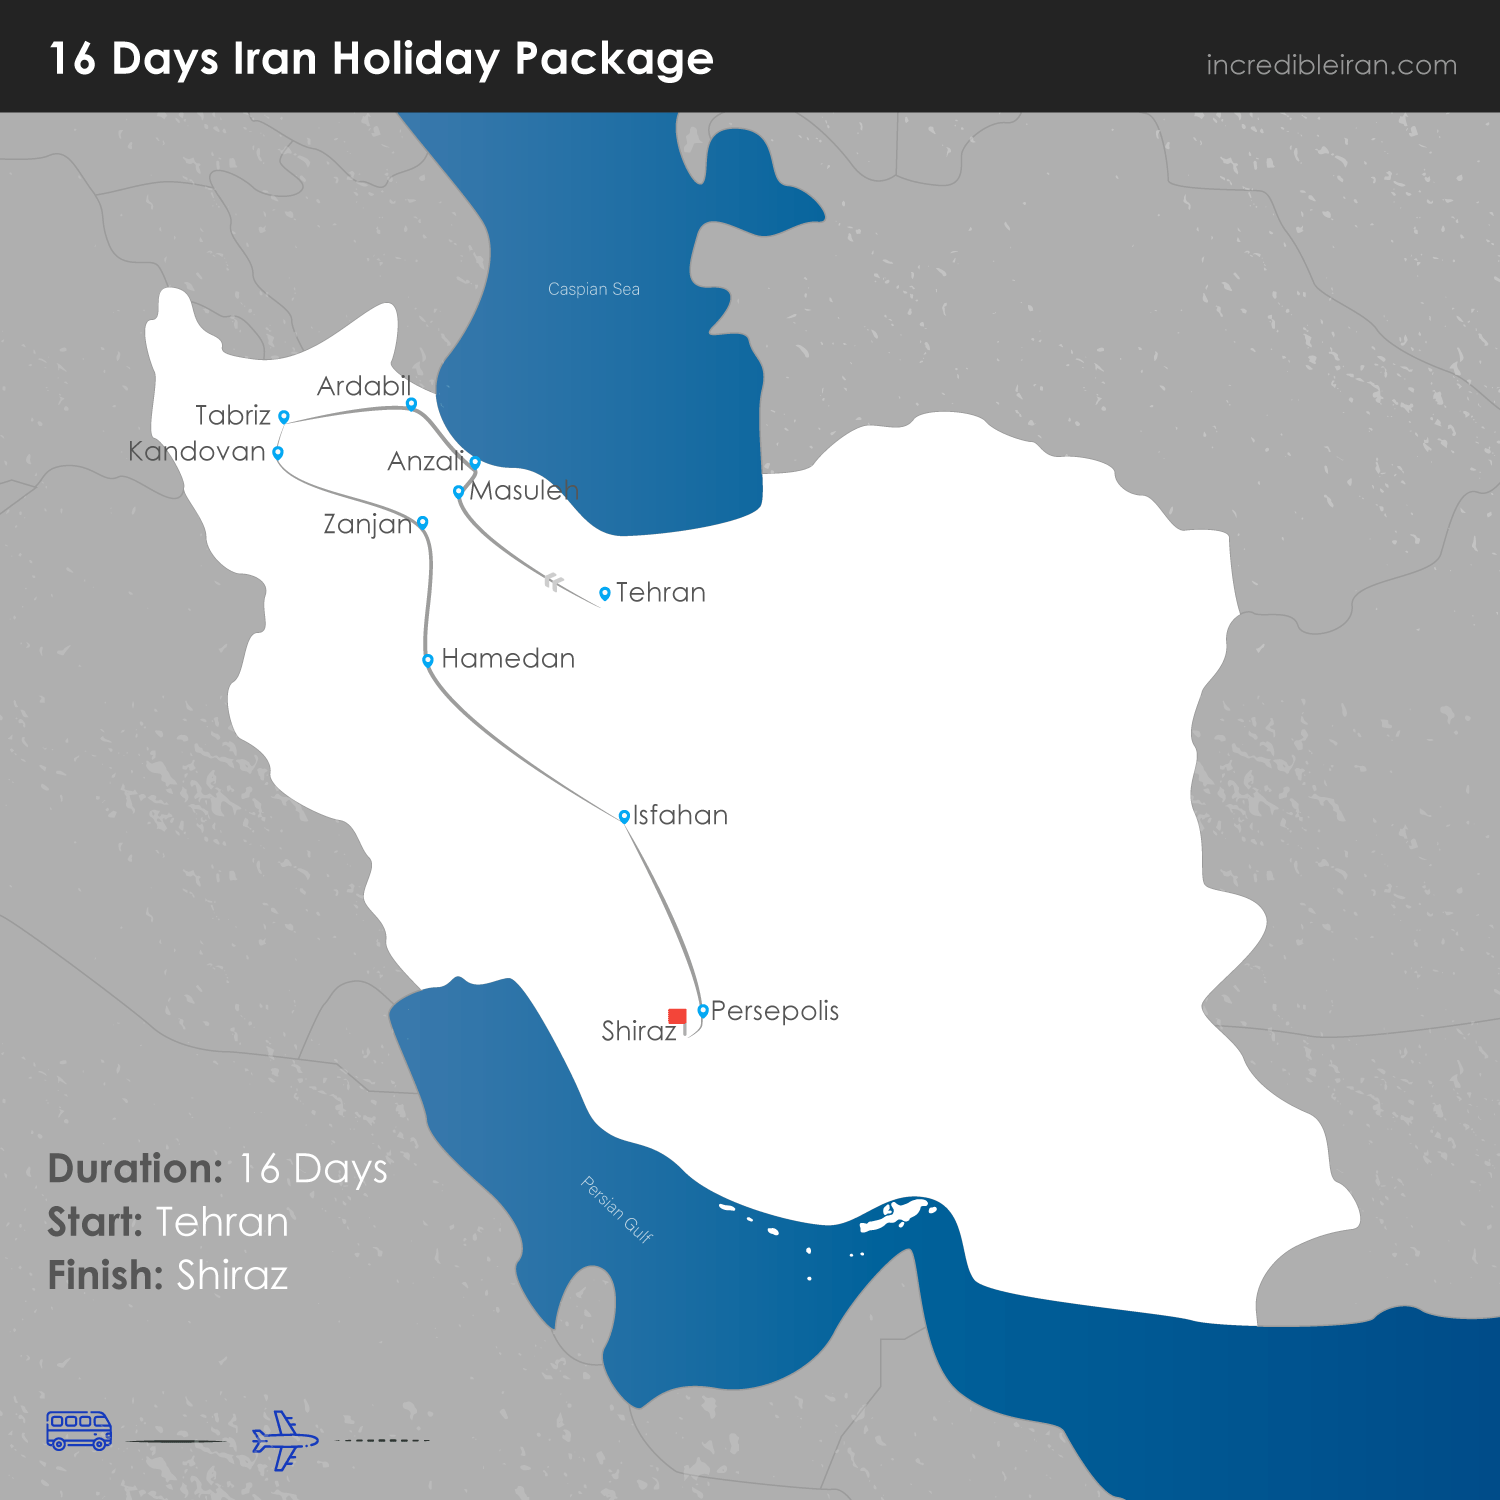 16 Days Iran Holiday Package